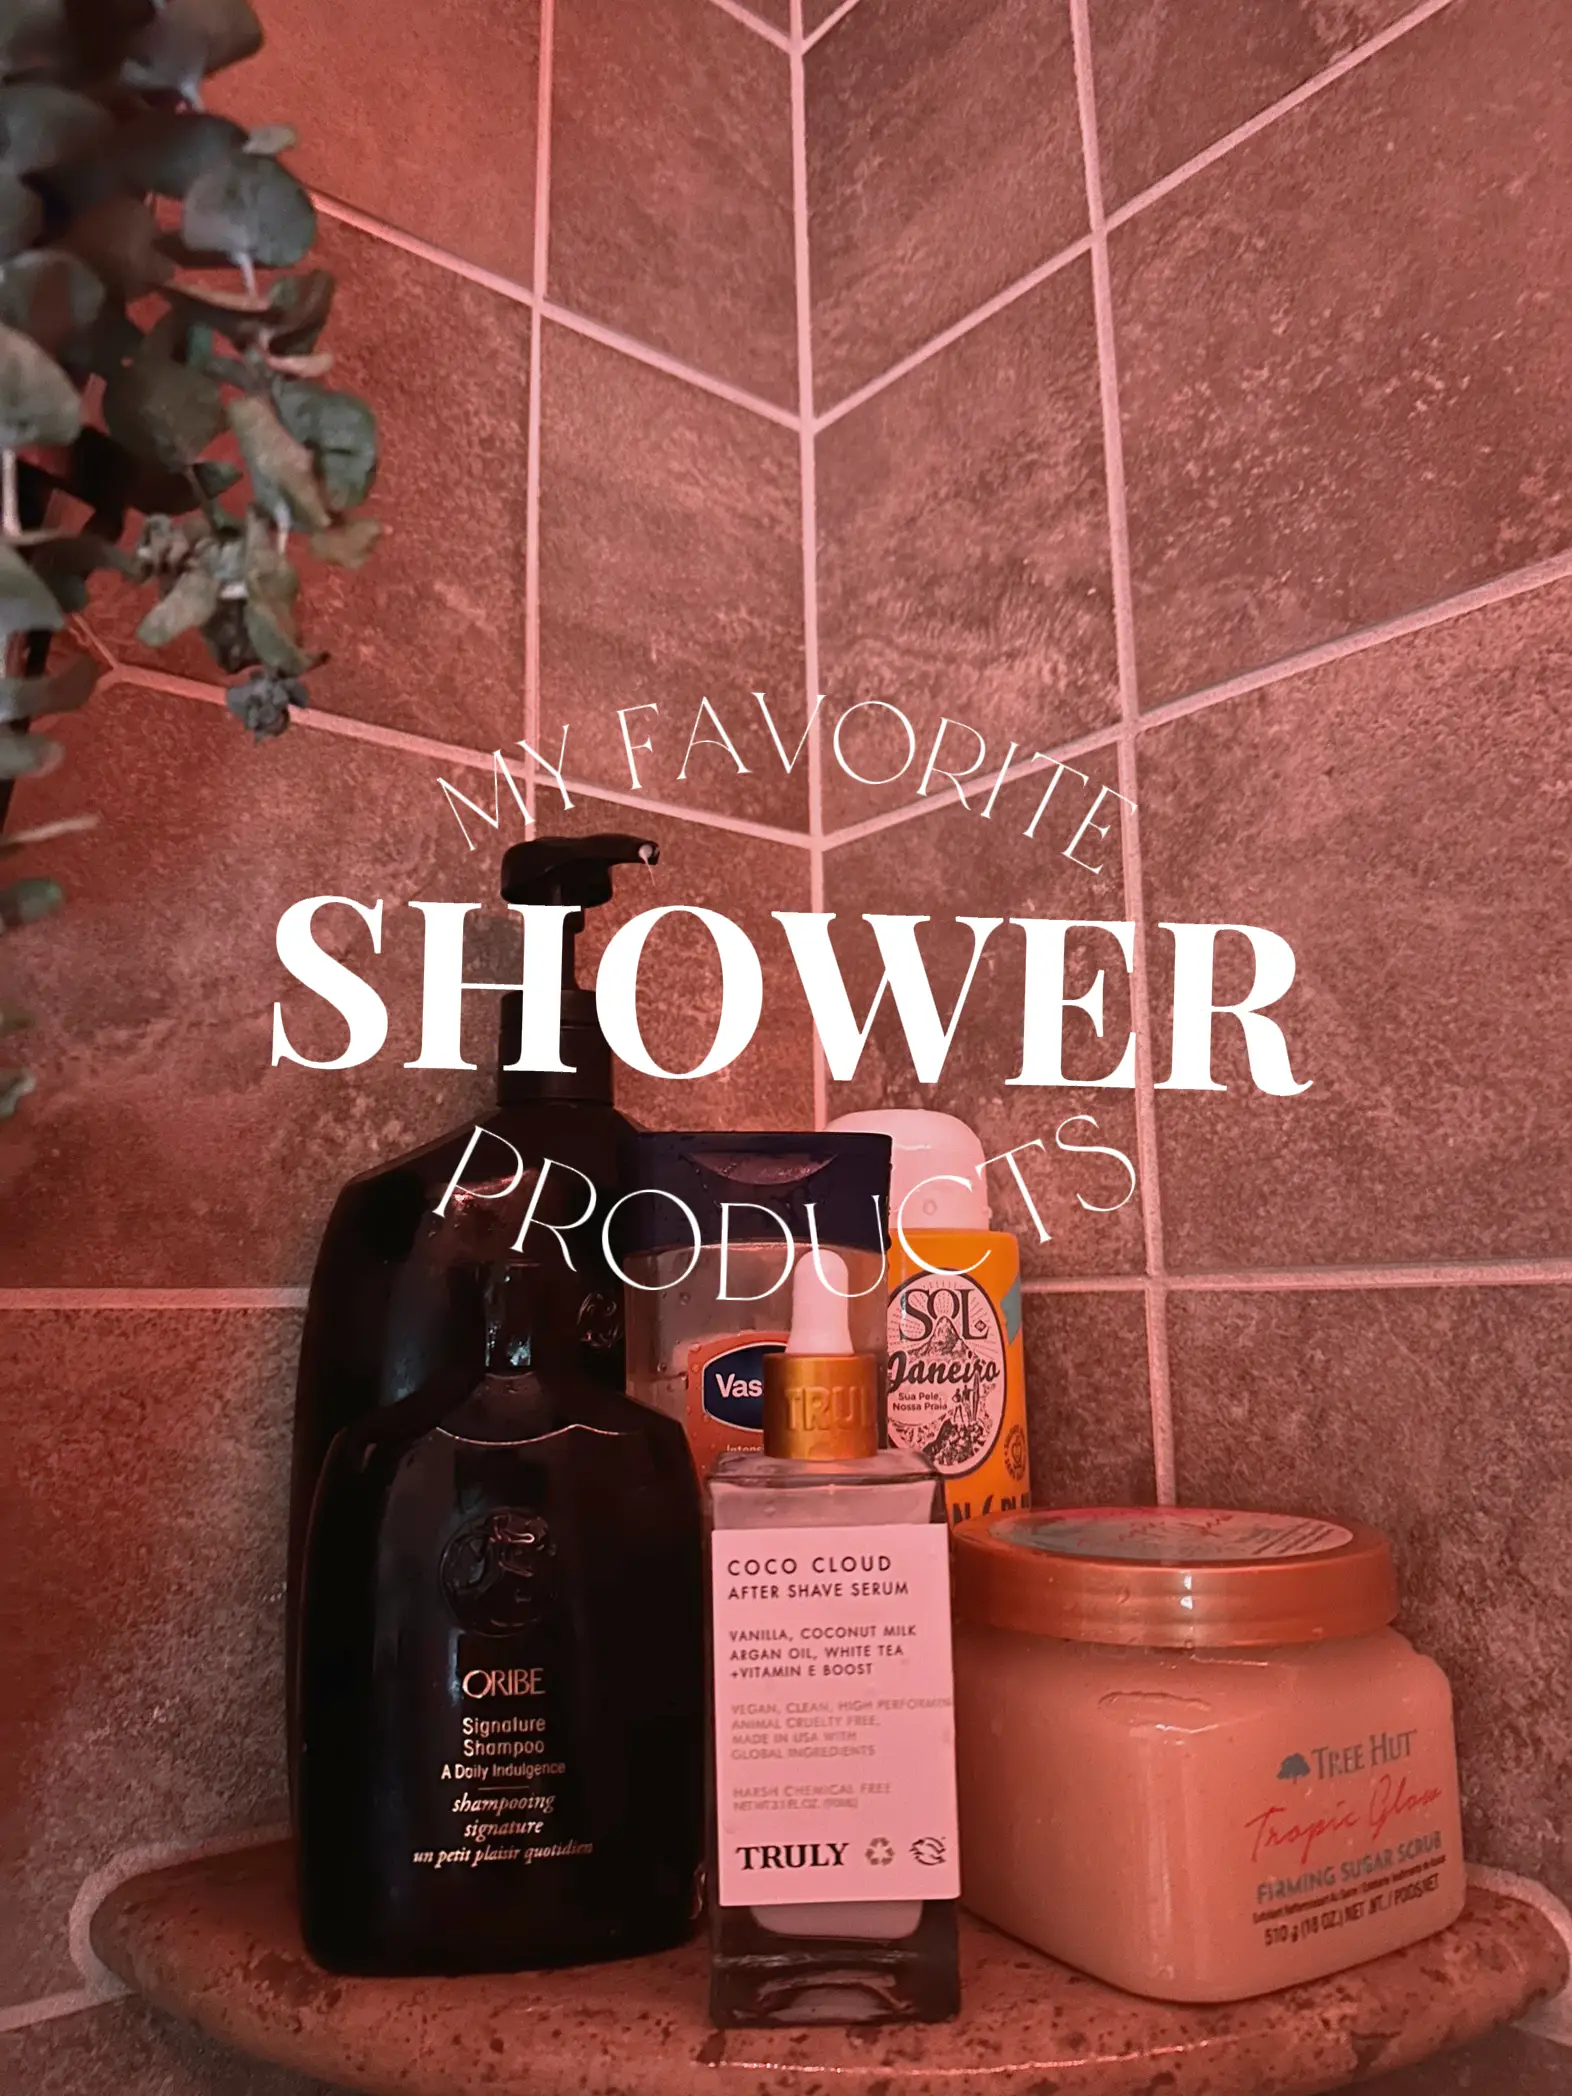  My favorite shower products.